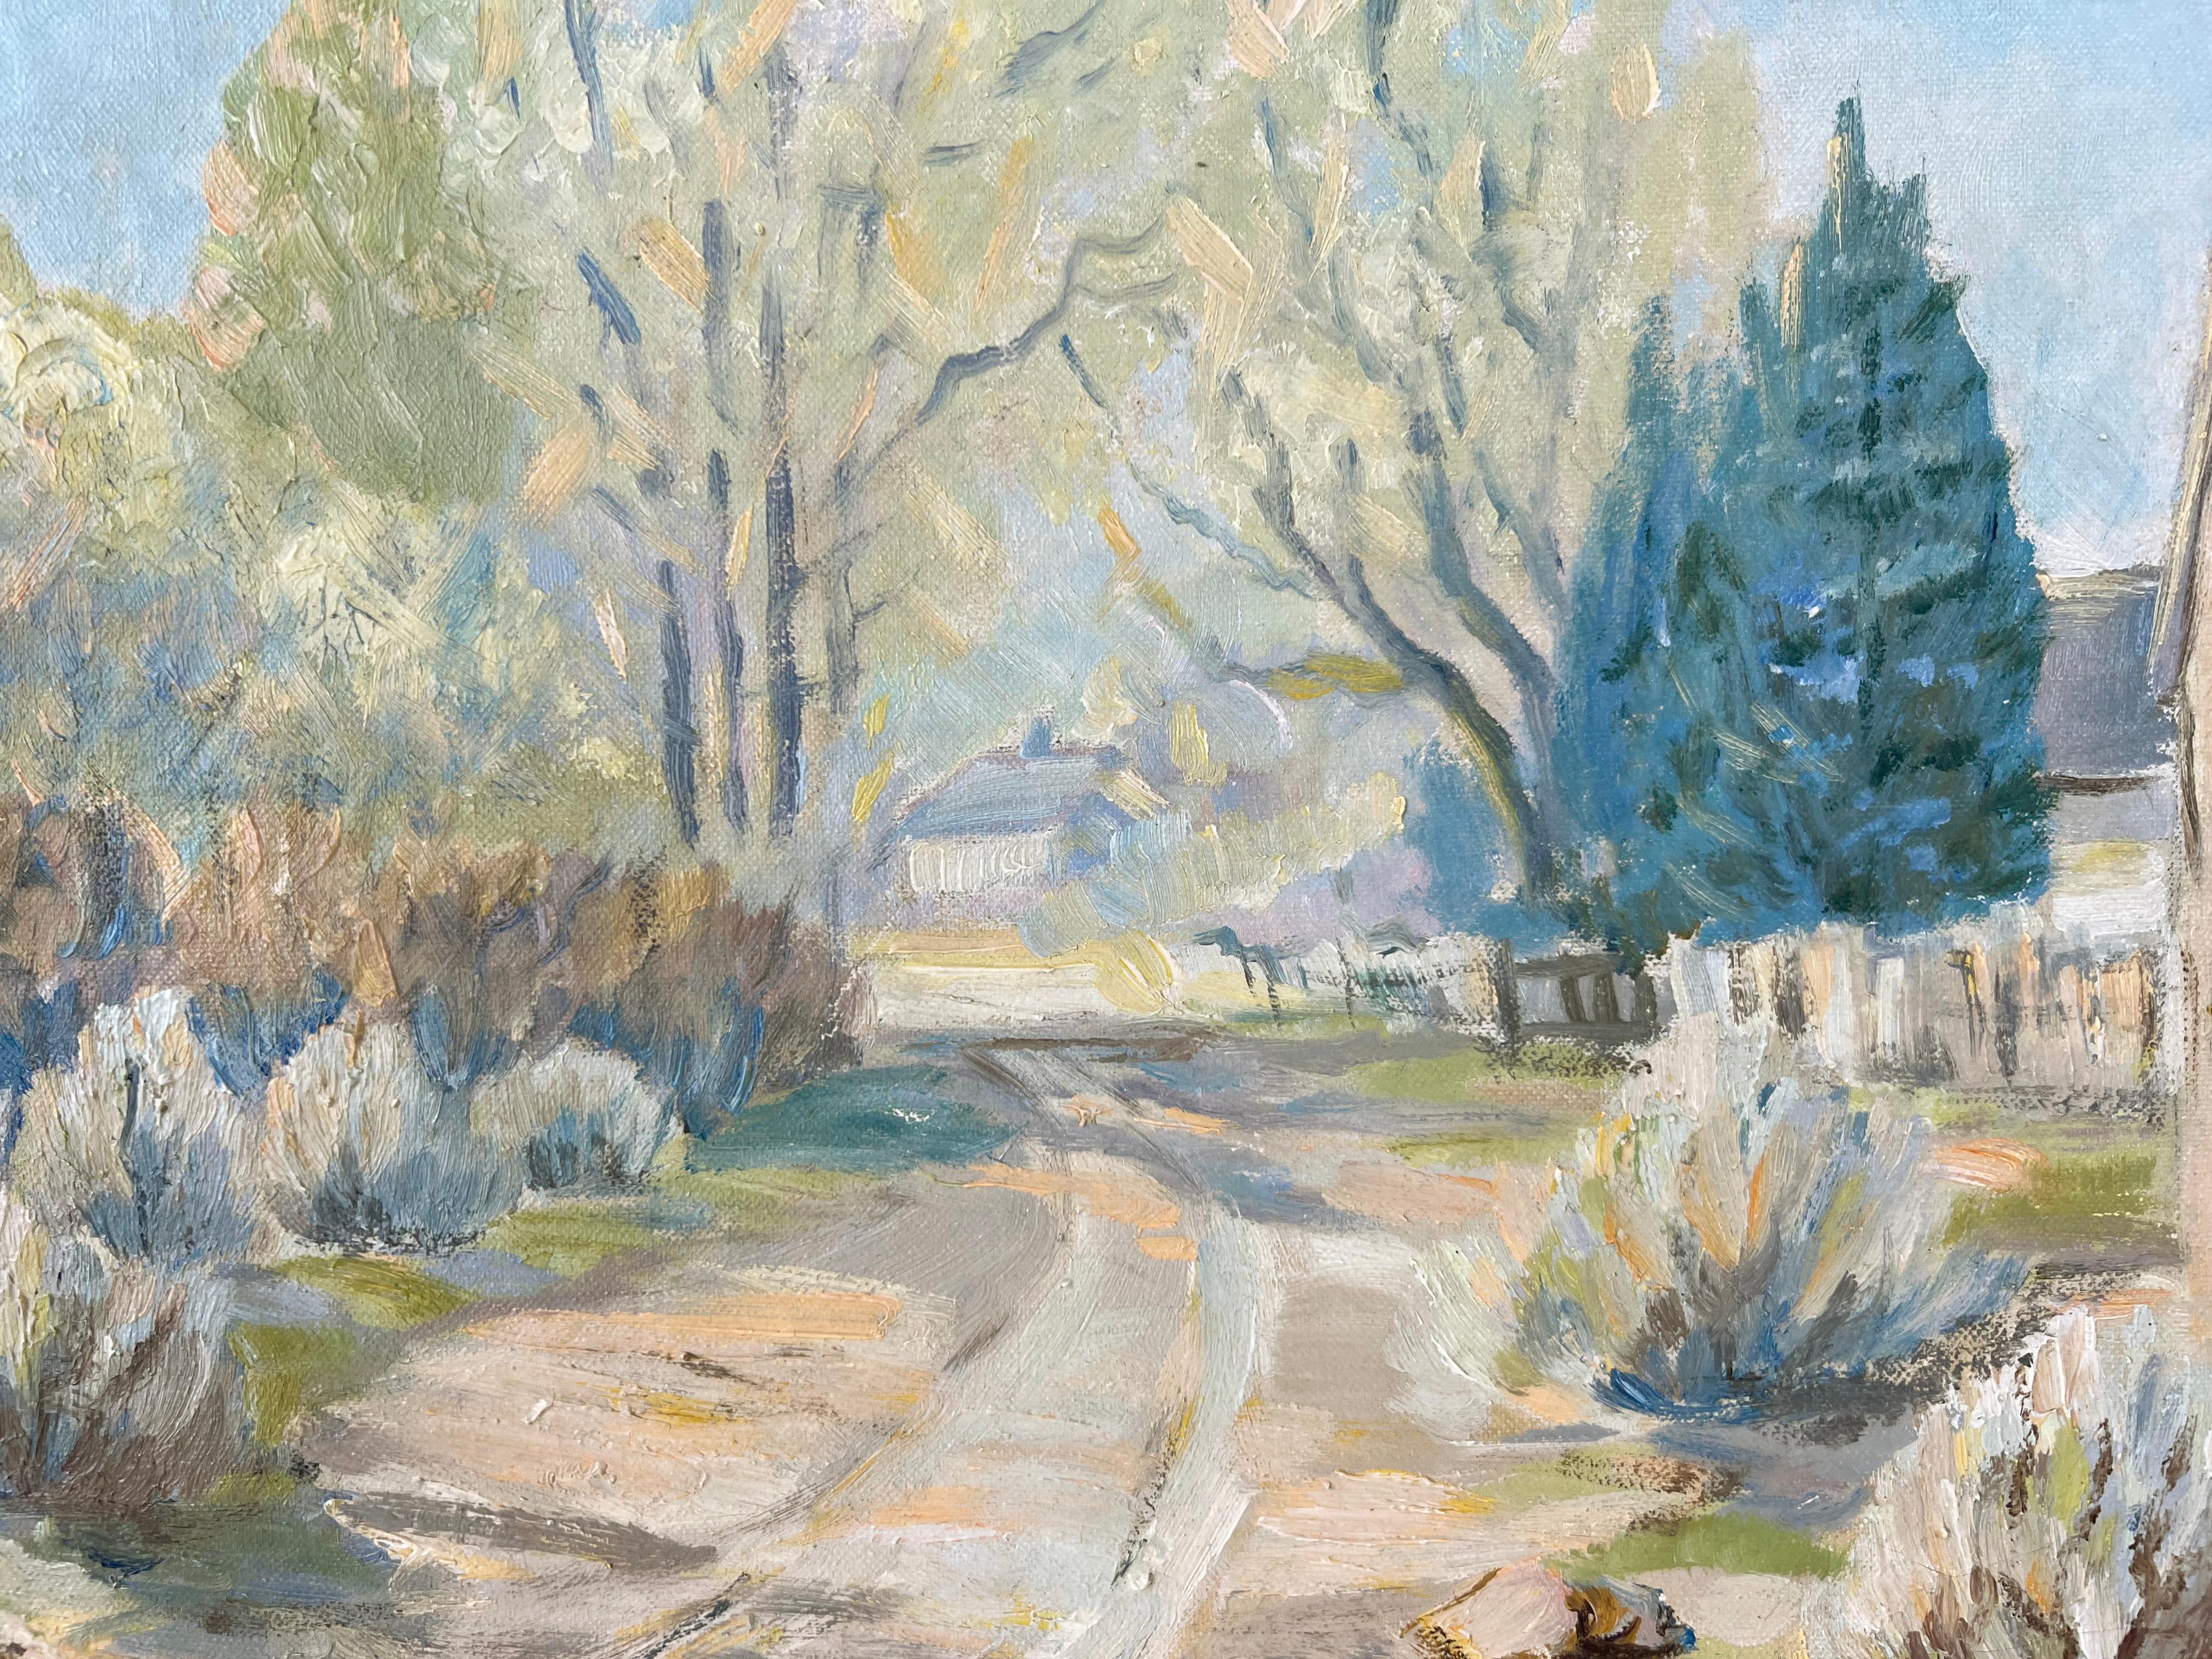 California School - Desert Ranch Road Landscape Oil on Canvas - American Impressionist Painting by Unknown